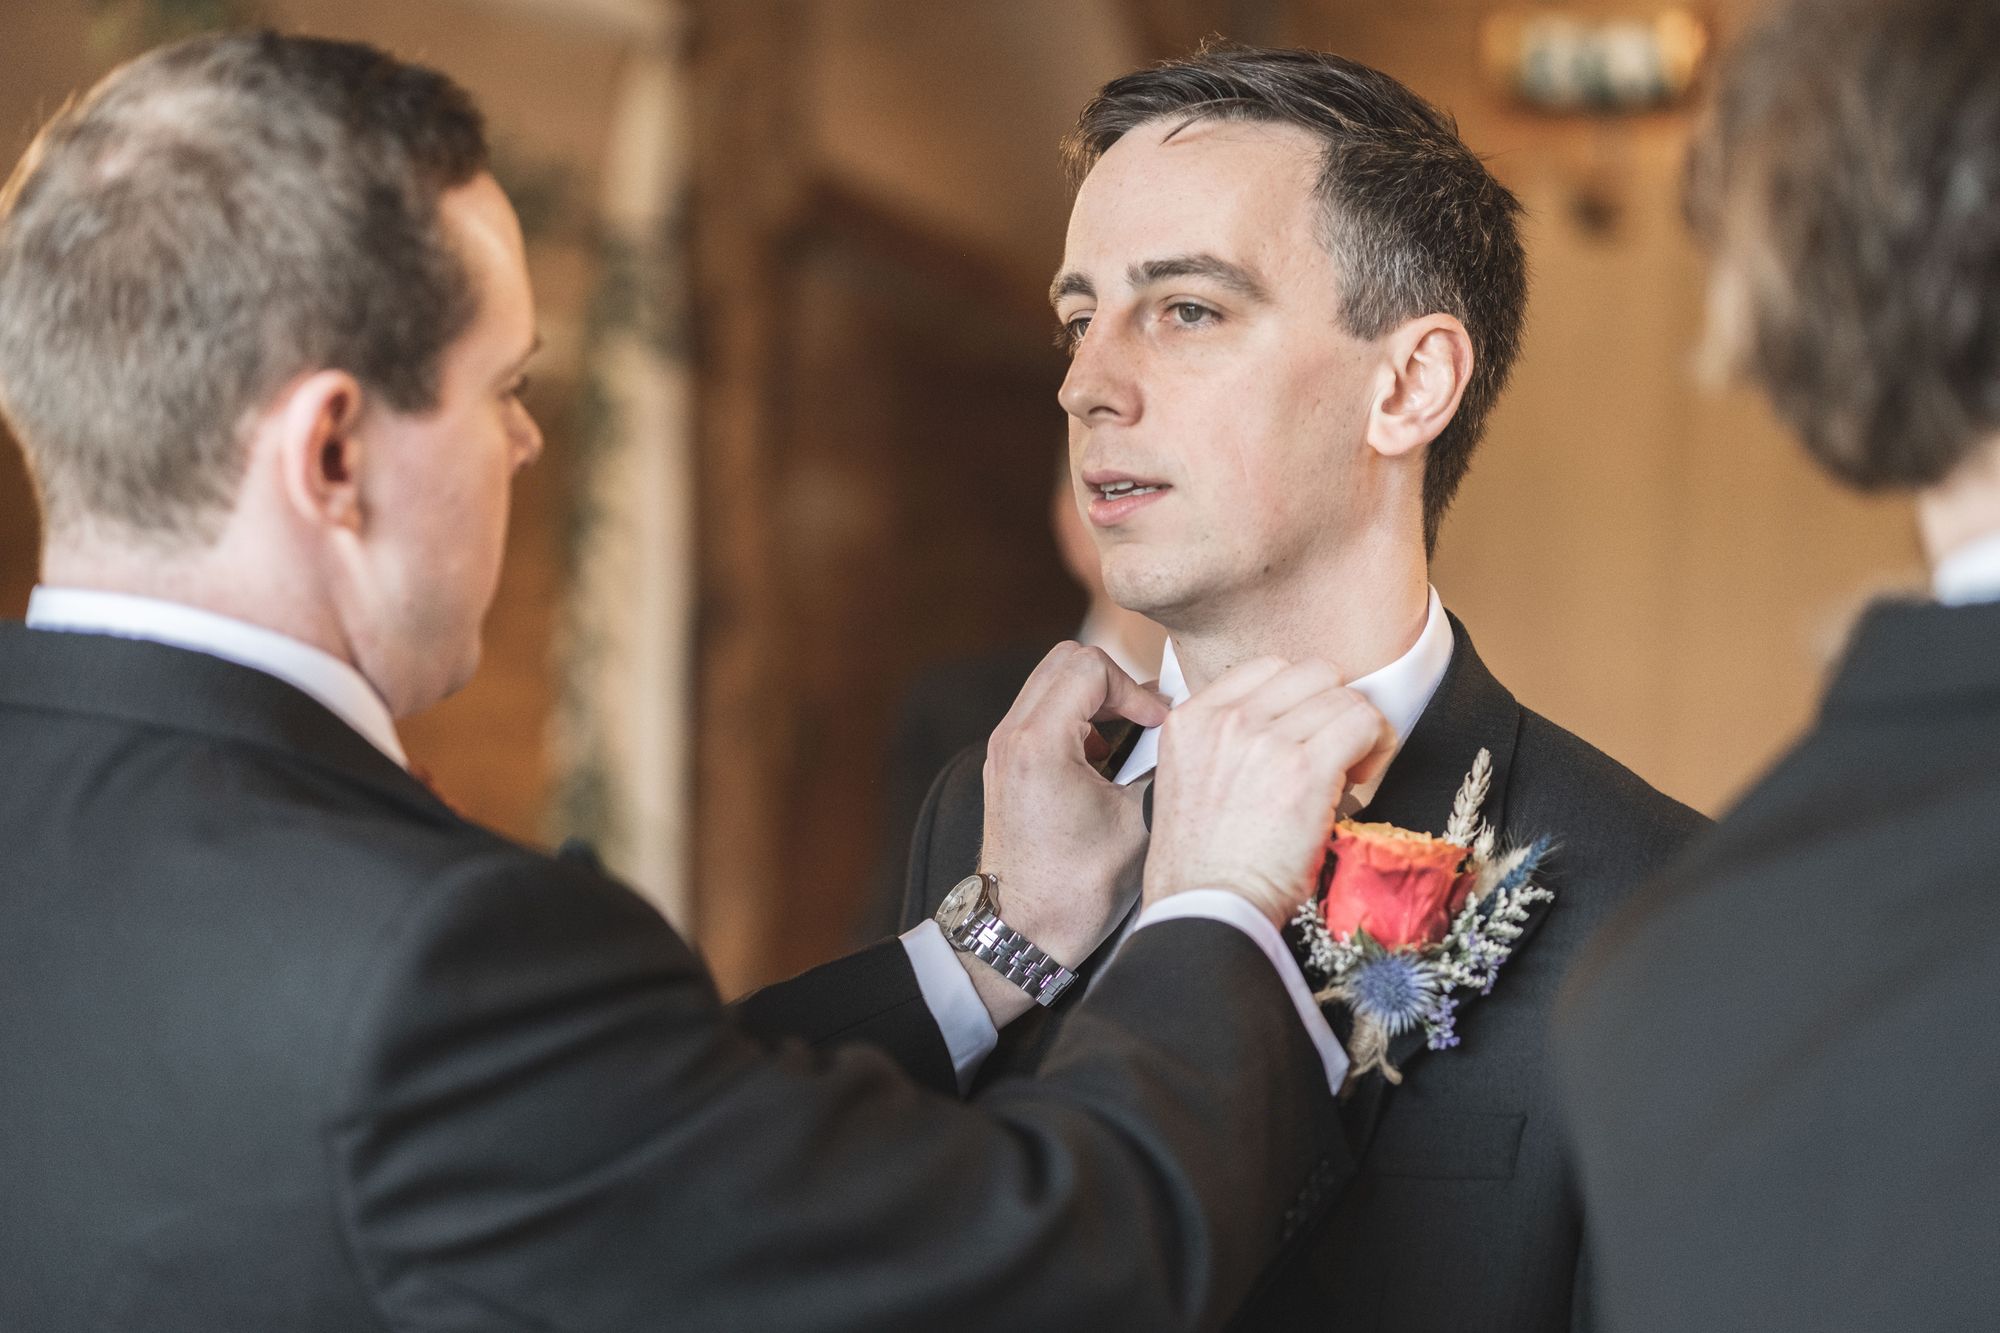 James' best man adjusting James' tie and collar prior to the wedding ceremony at Lains Barn. Photo thanks to The Falkenburgs via Big Day Productions